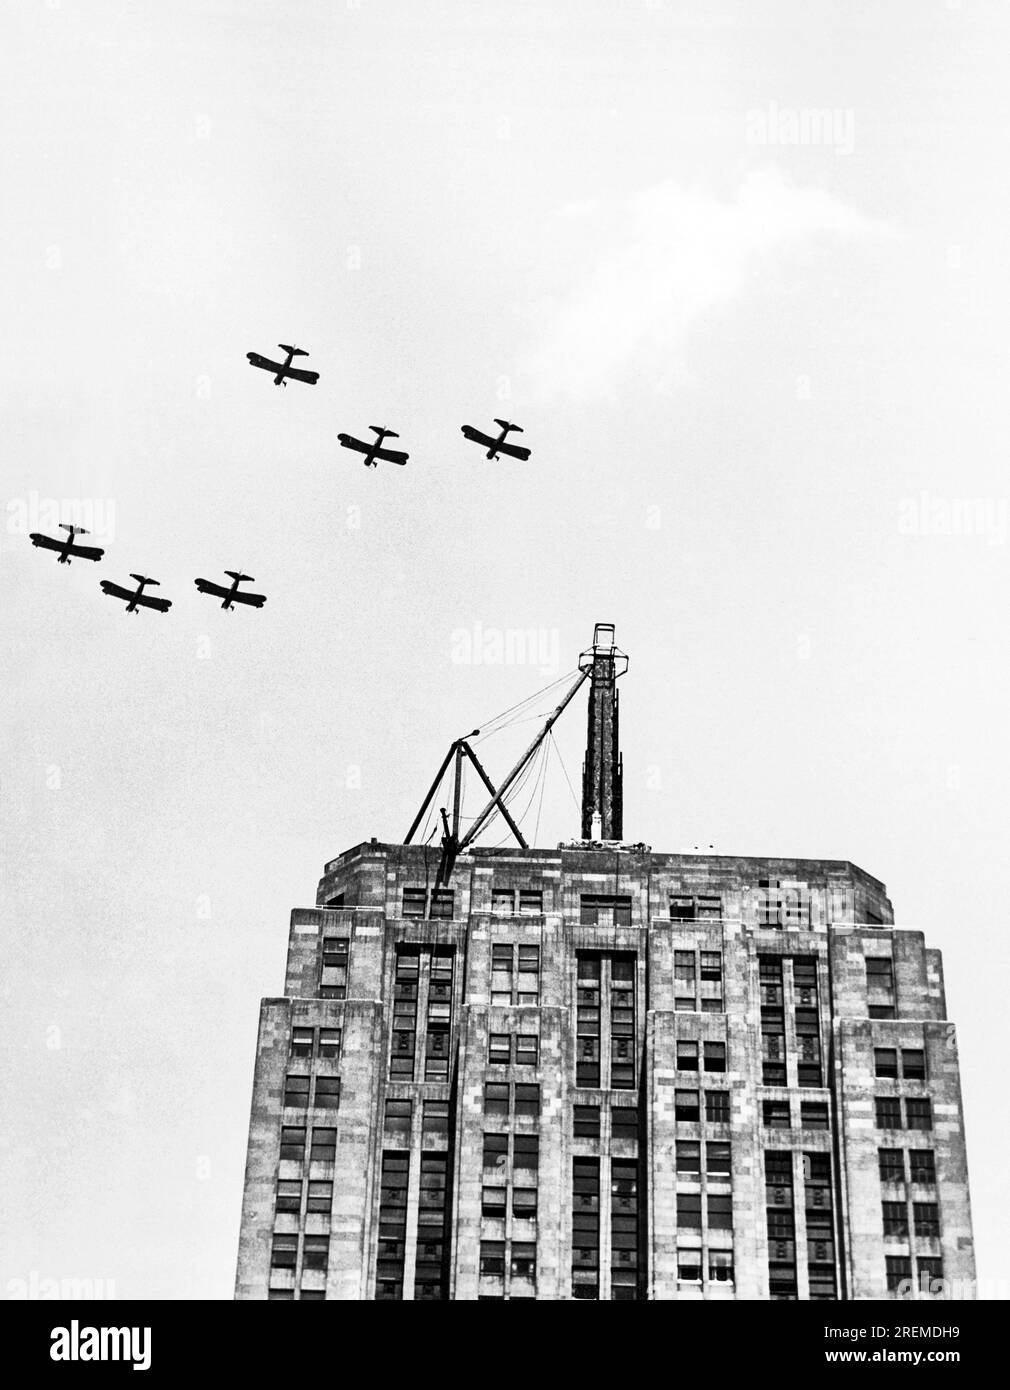 Chicago, Illinois:  July 9, 1930 Six U.S. Army planes fly in formation over the Palmolive building in salute to the Lindbergh Beacon under construction on the top of the building. It will soon be dedicated as the largest and most powerful beacon in the world, having 2 billion candle power and able to  throw a light for 500 miles. Stock Photo